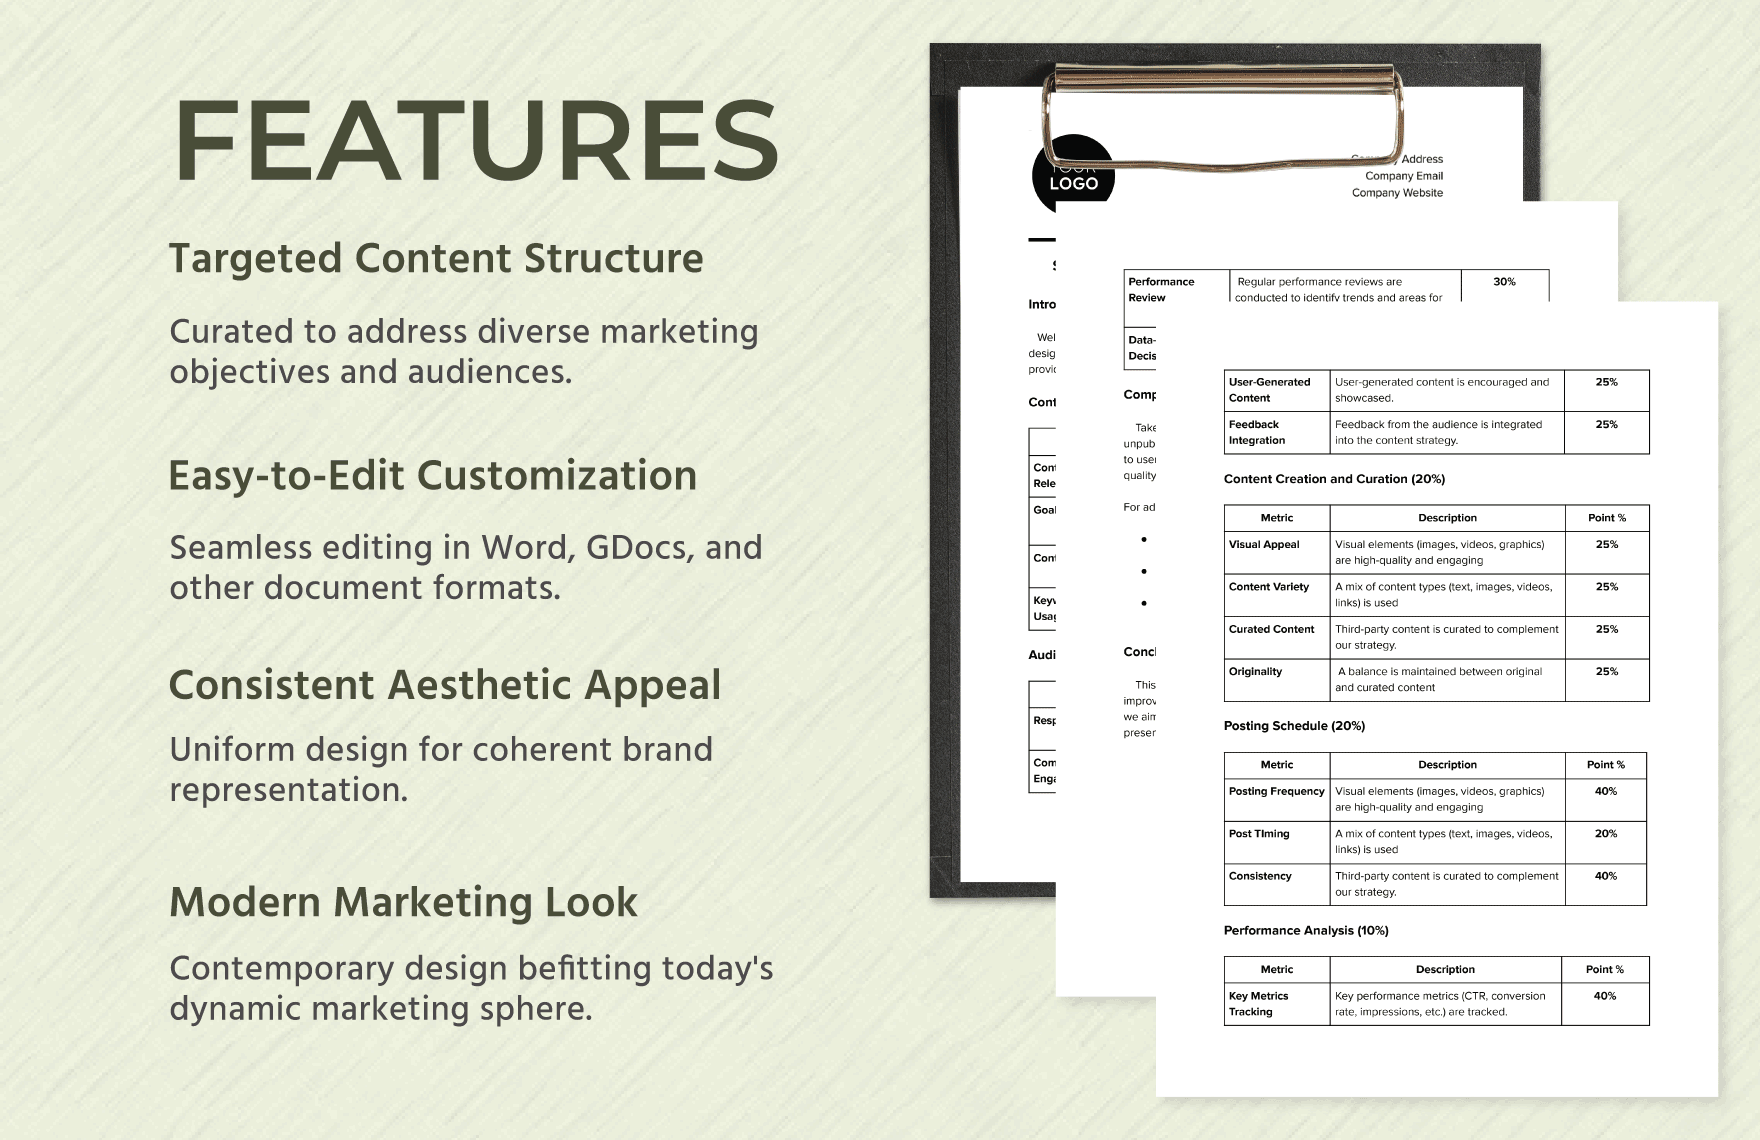 Social Media Marketing Best Practices Rubric Template